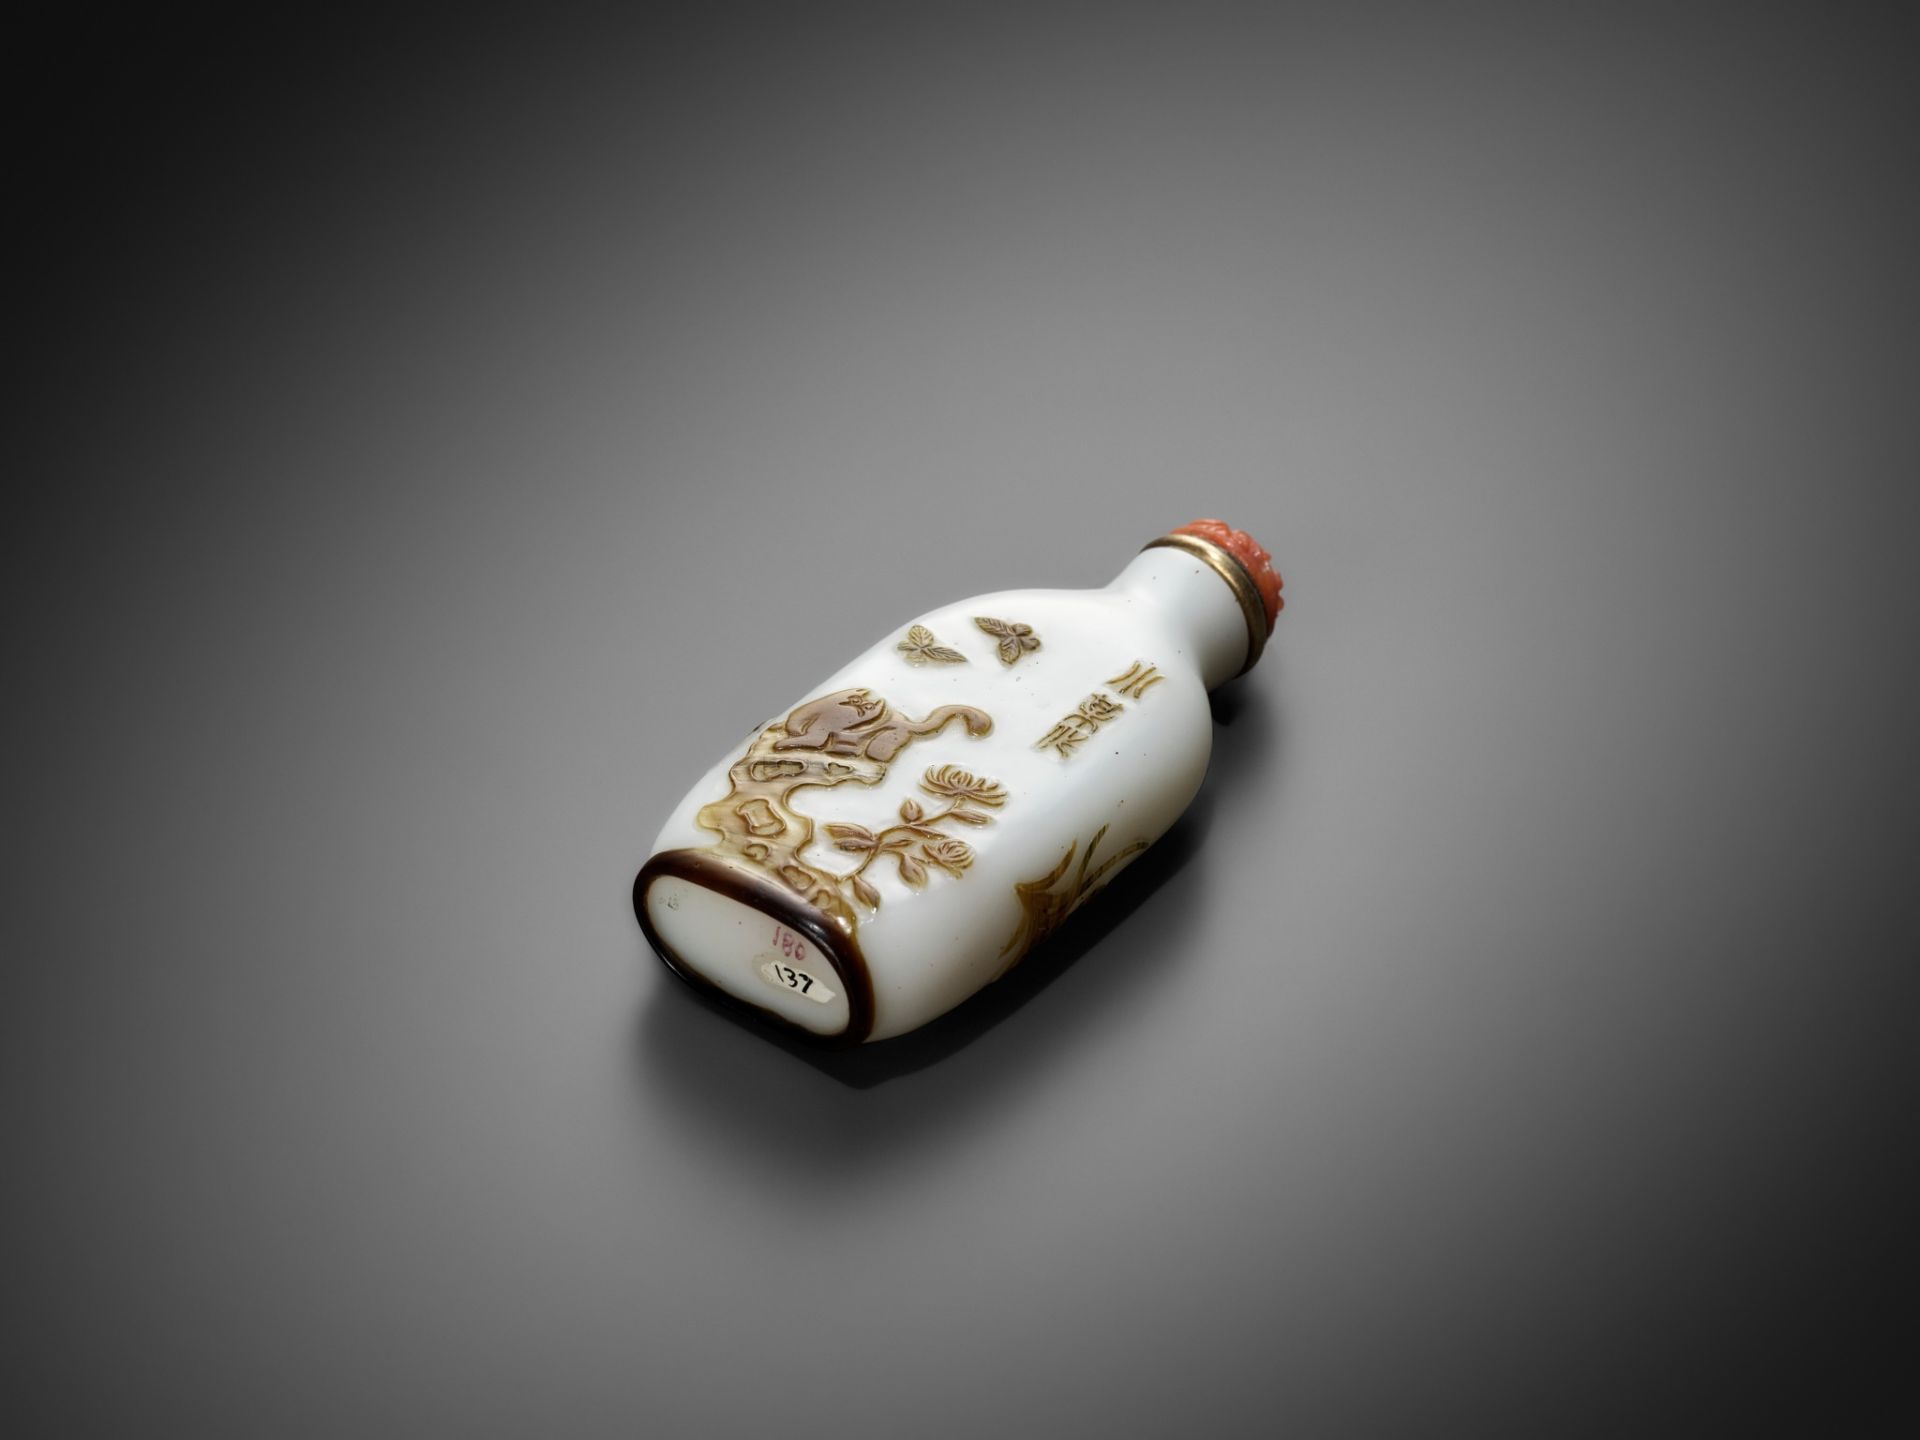 AN INSCRIBED OVERLAY GLASS ‘CAT AND BUTTERFLY’ SNUFF BOTTLE, BY WANG SU, YANGZHOU SCHOOL, 1820-1840 - Image 19 of 19